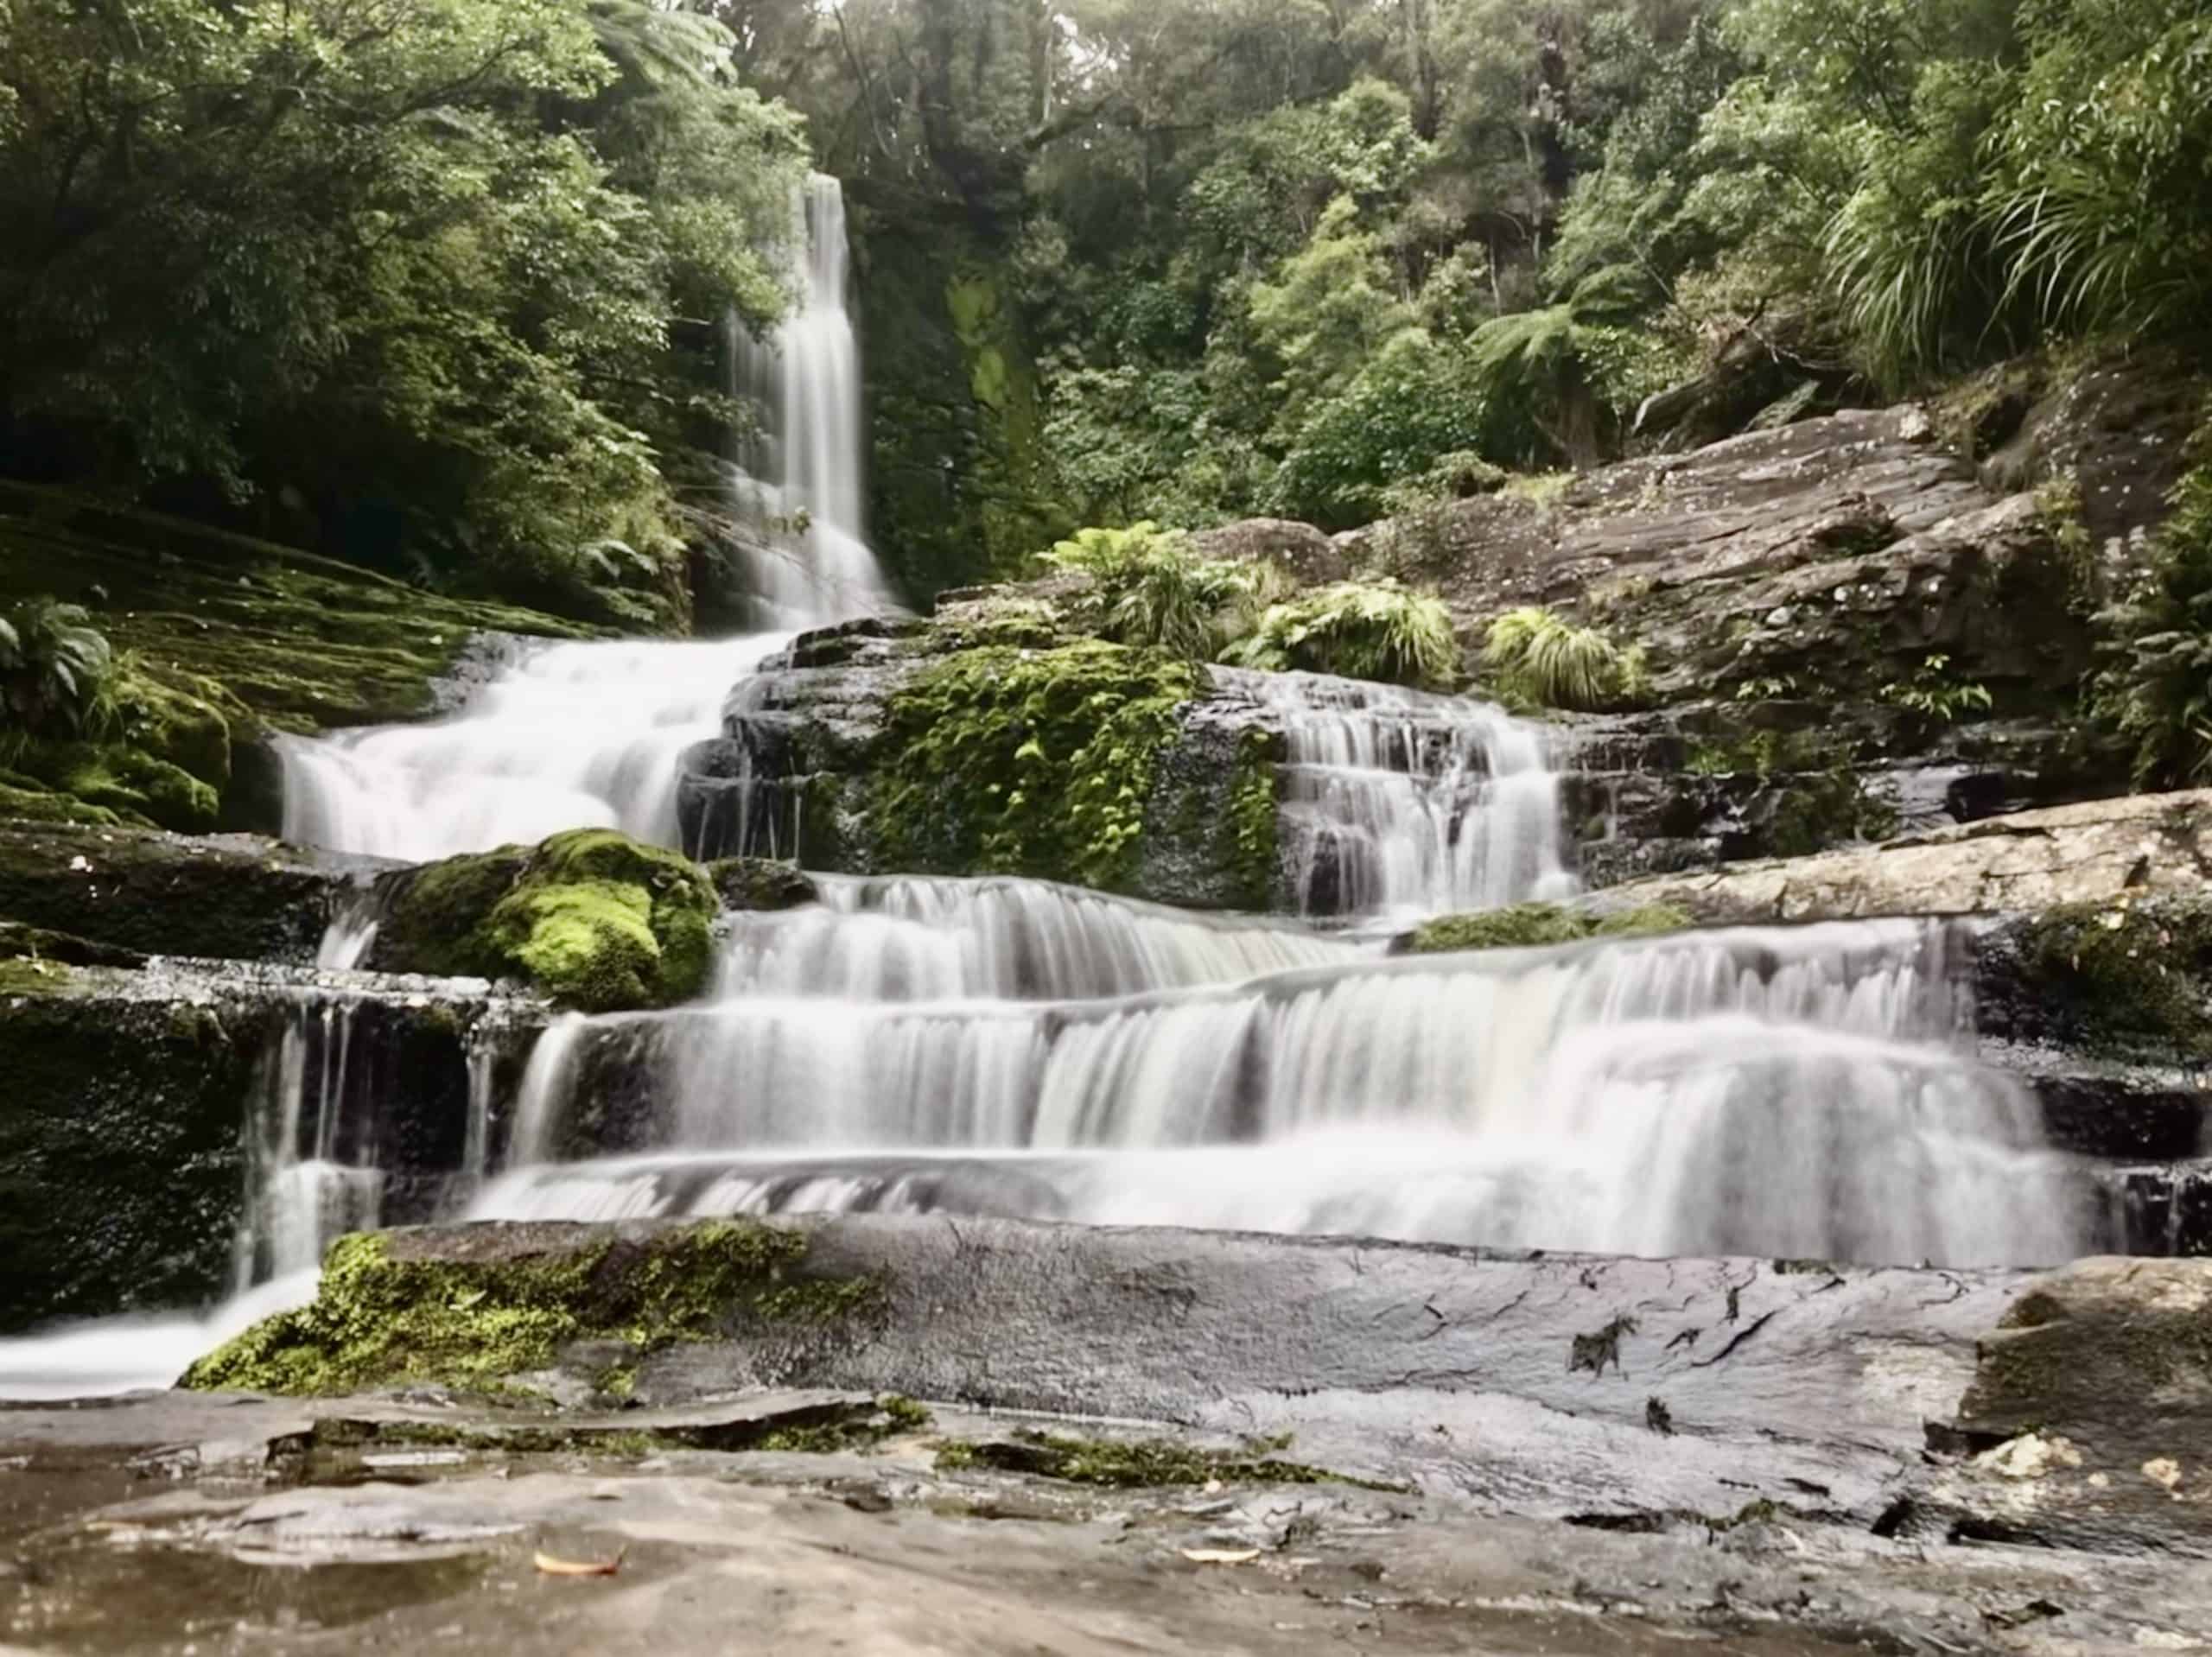 McLeans waterfall in the Catlins Coast is a must see attraction